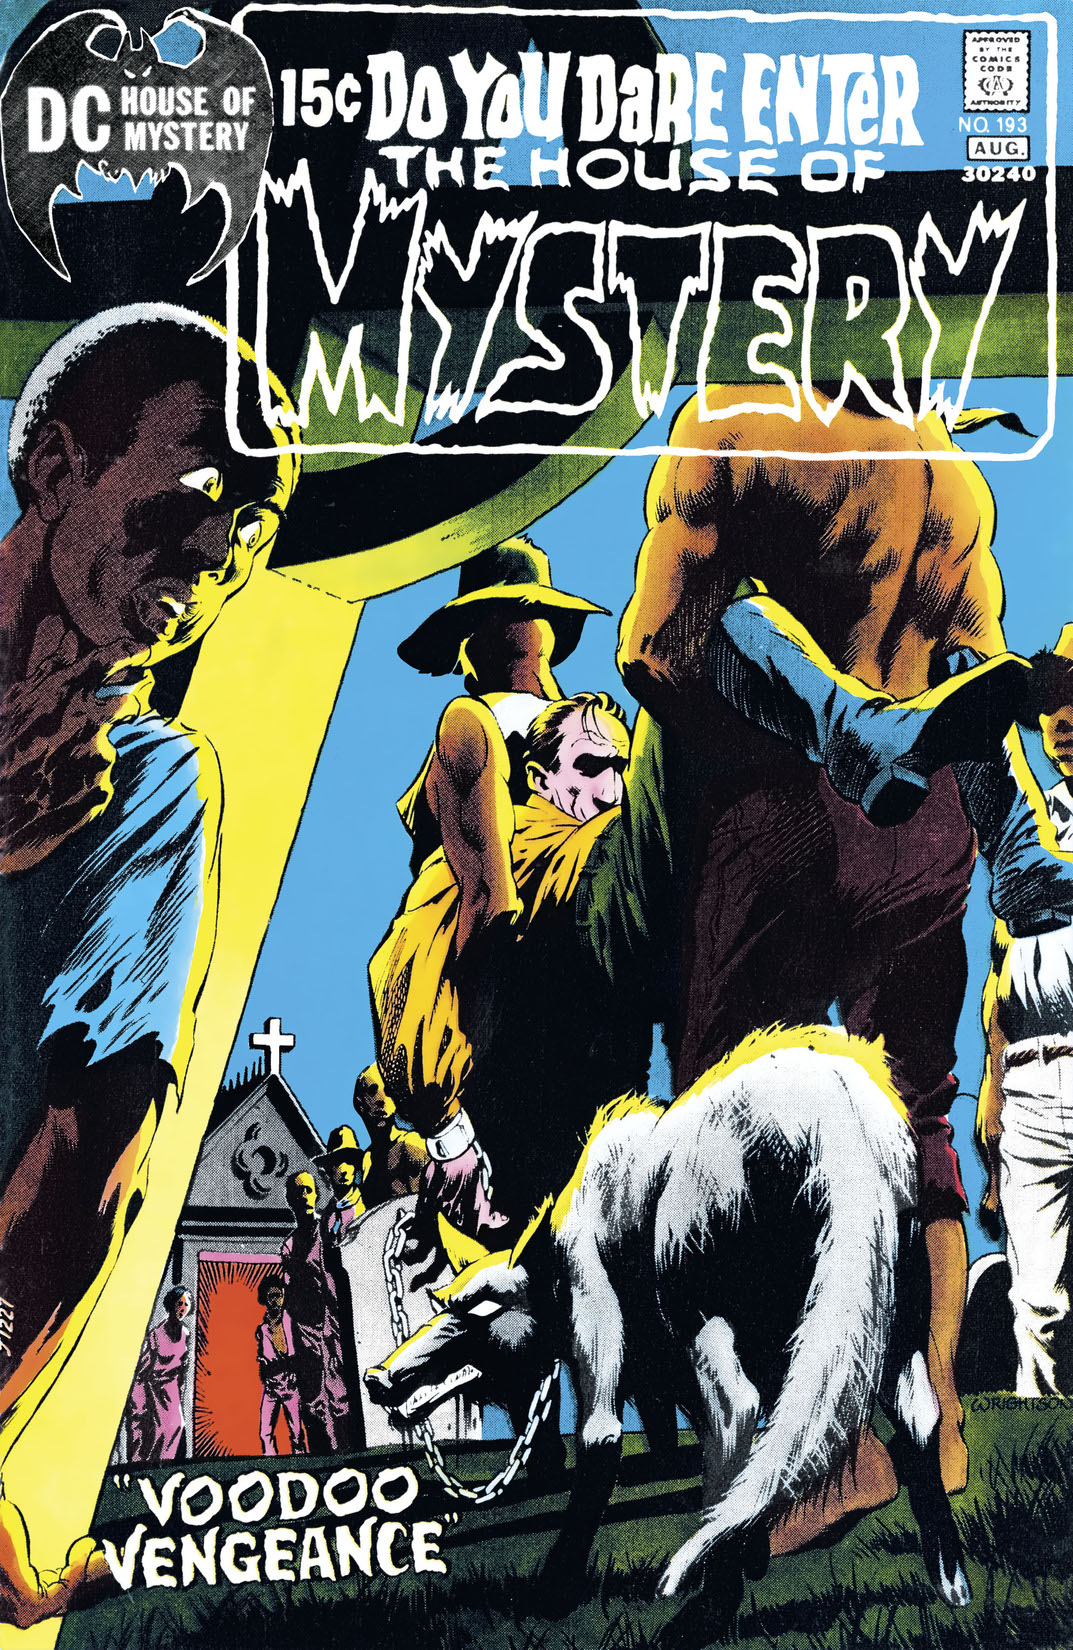 House of Mystery (1951-) #193 preview images